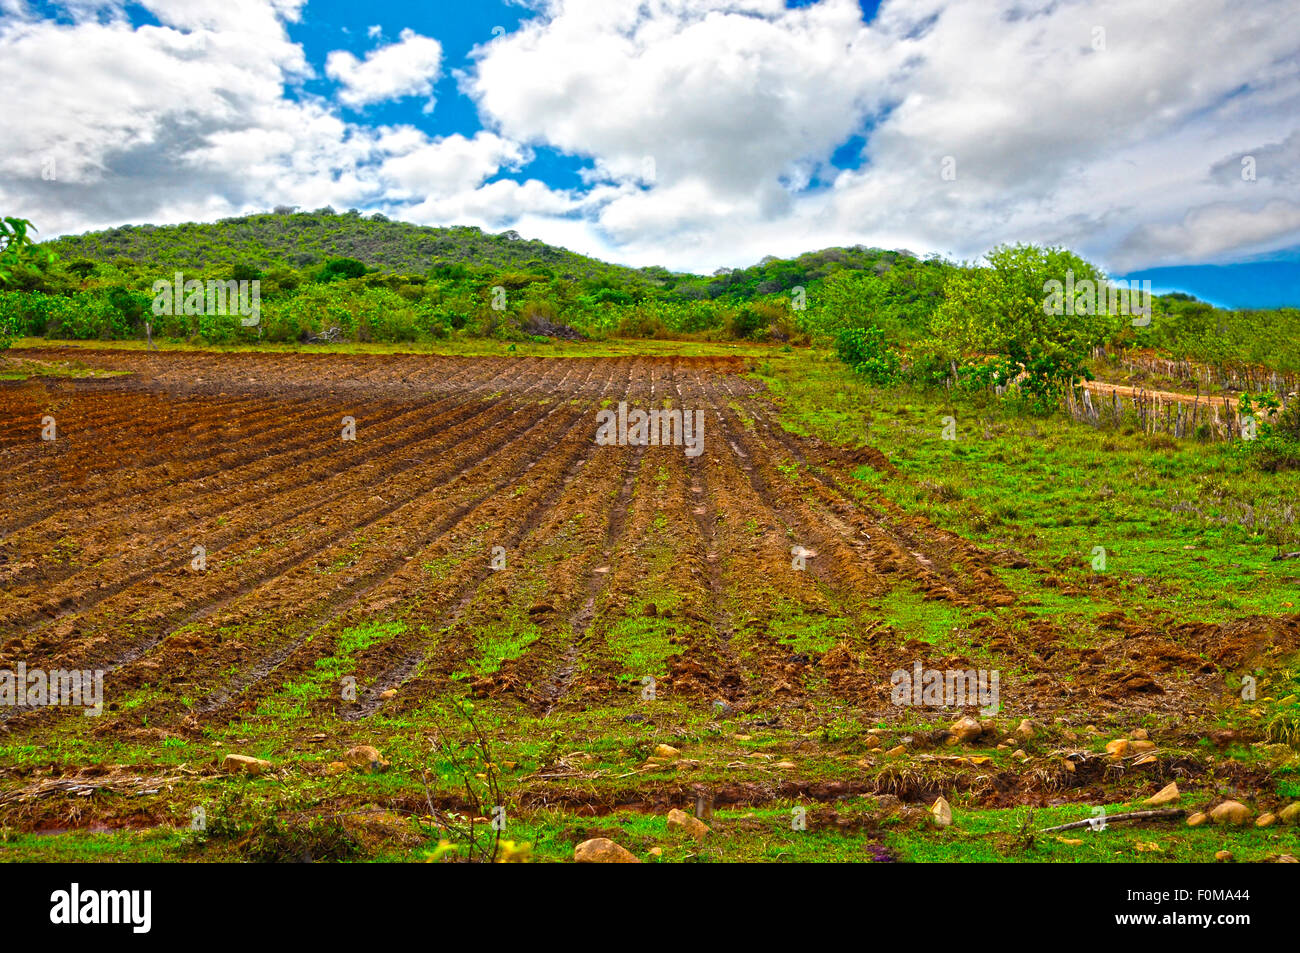 Rural scene of a farm field getting ready to be planted Stock Photo